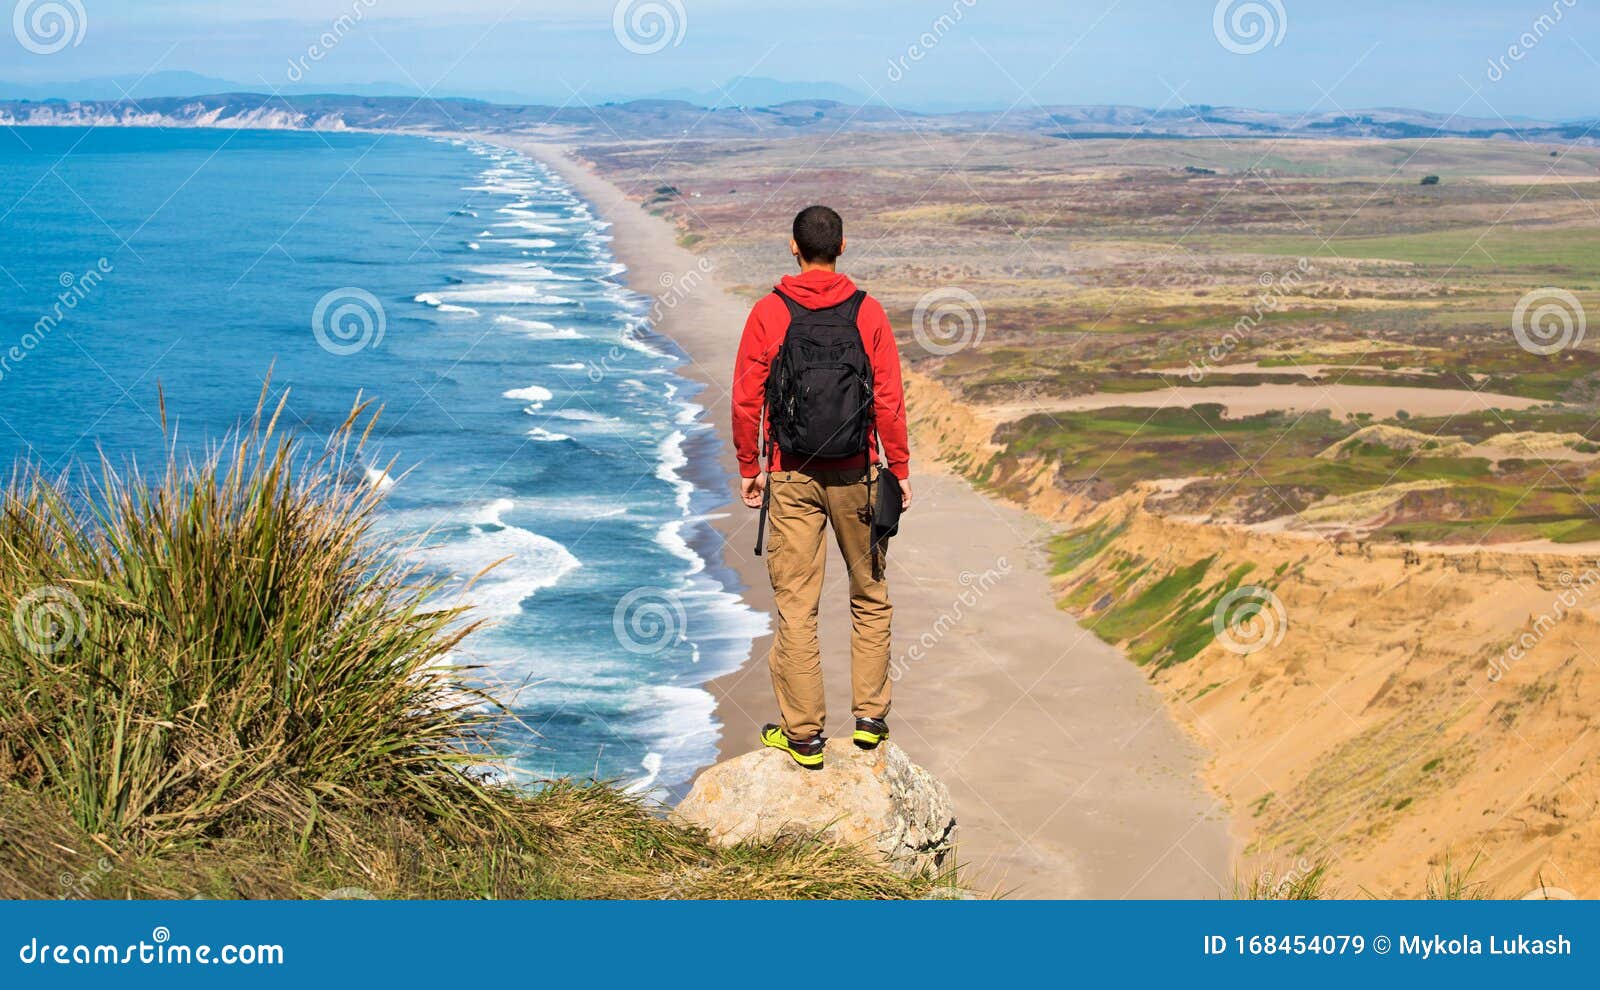 travel in point reyes national seashore, man hiker with backpack enjoying view, california, usa